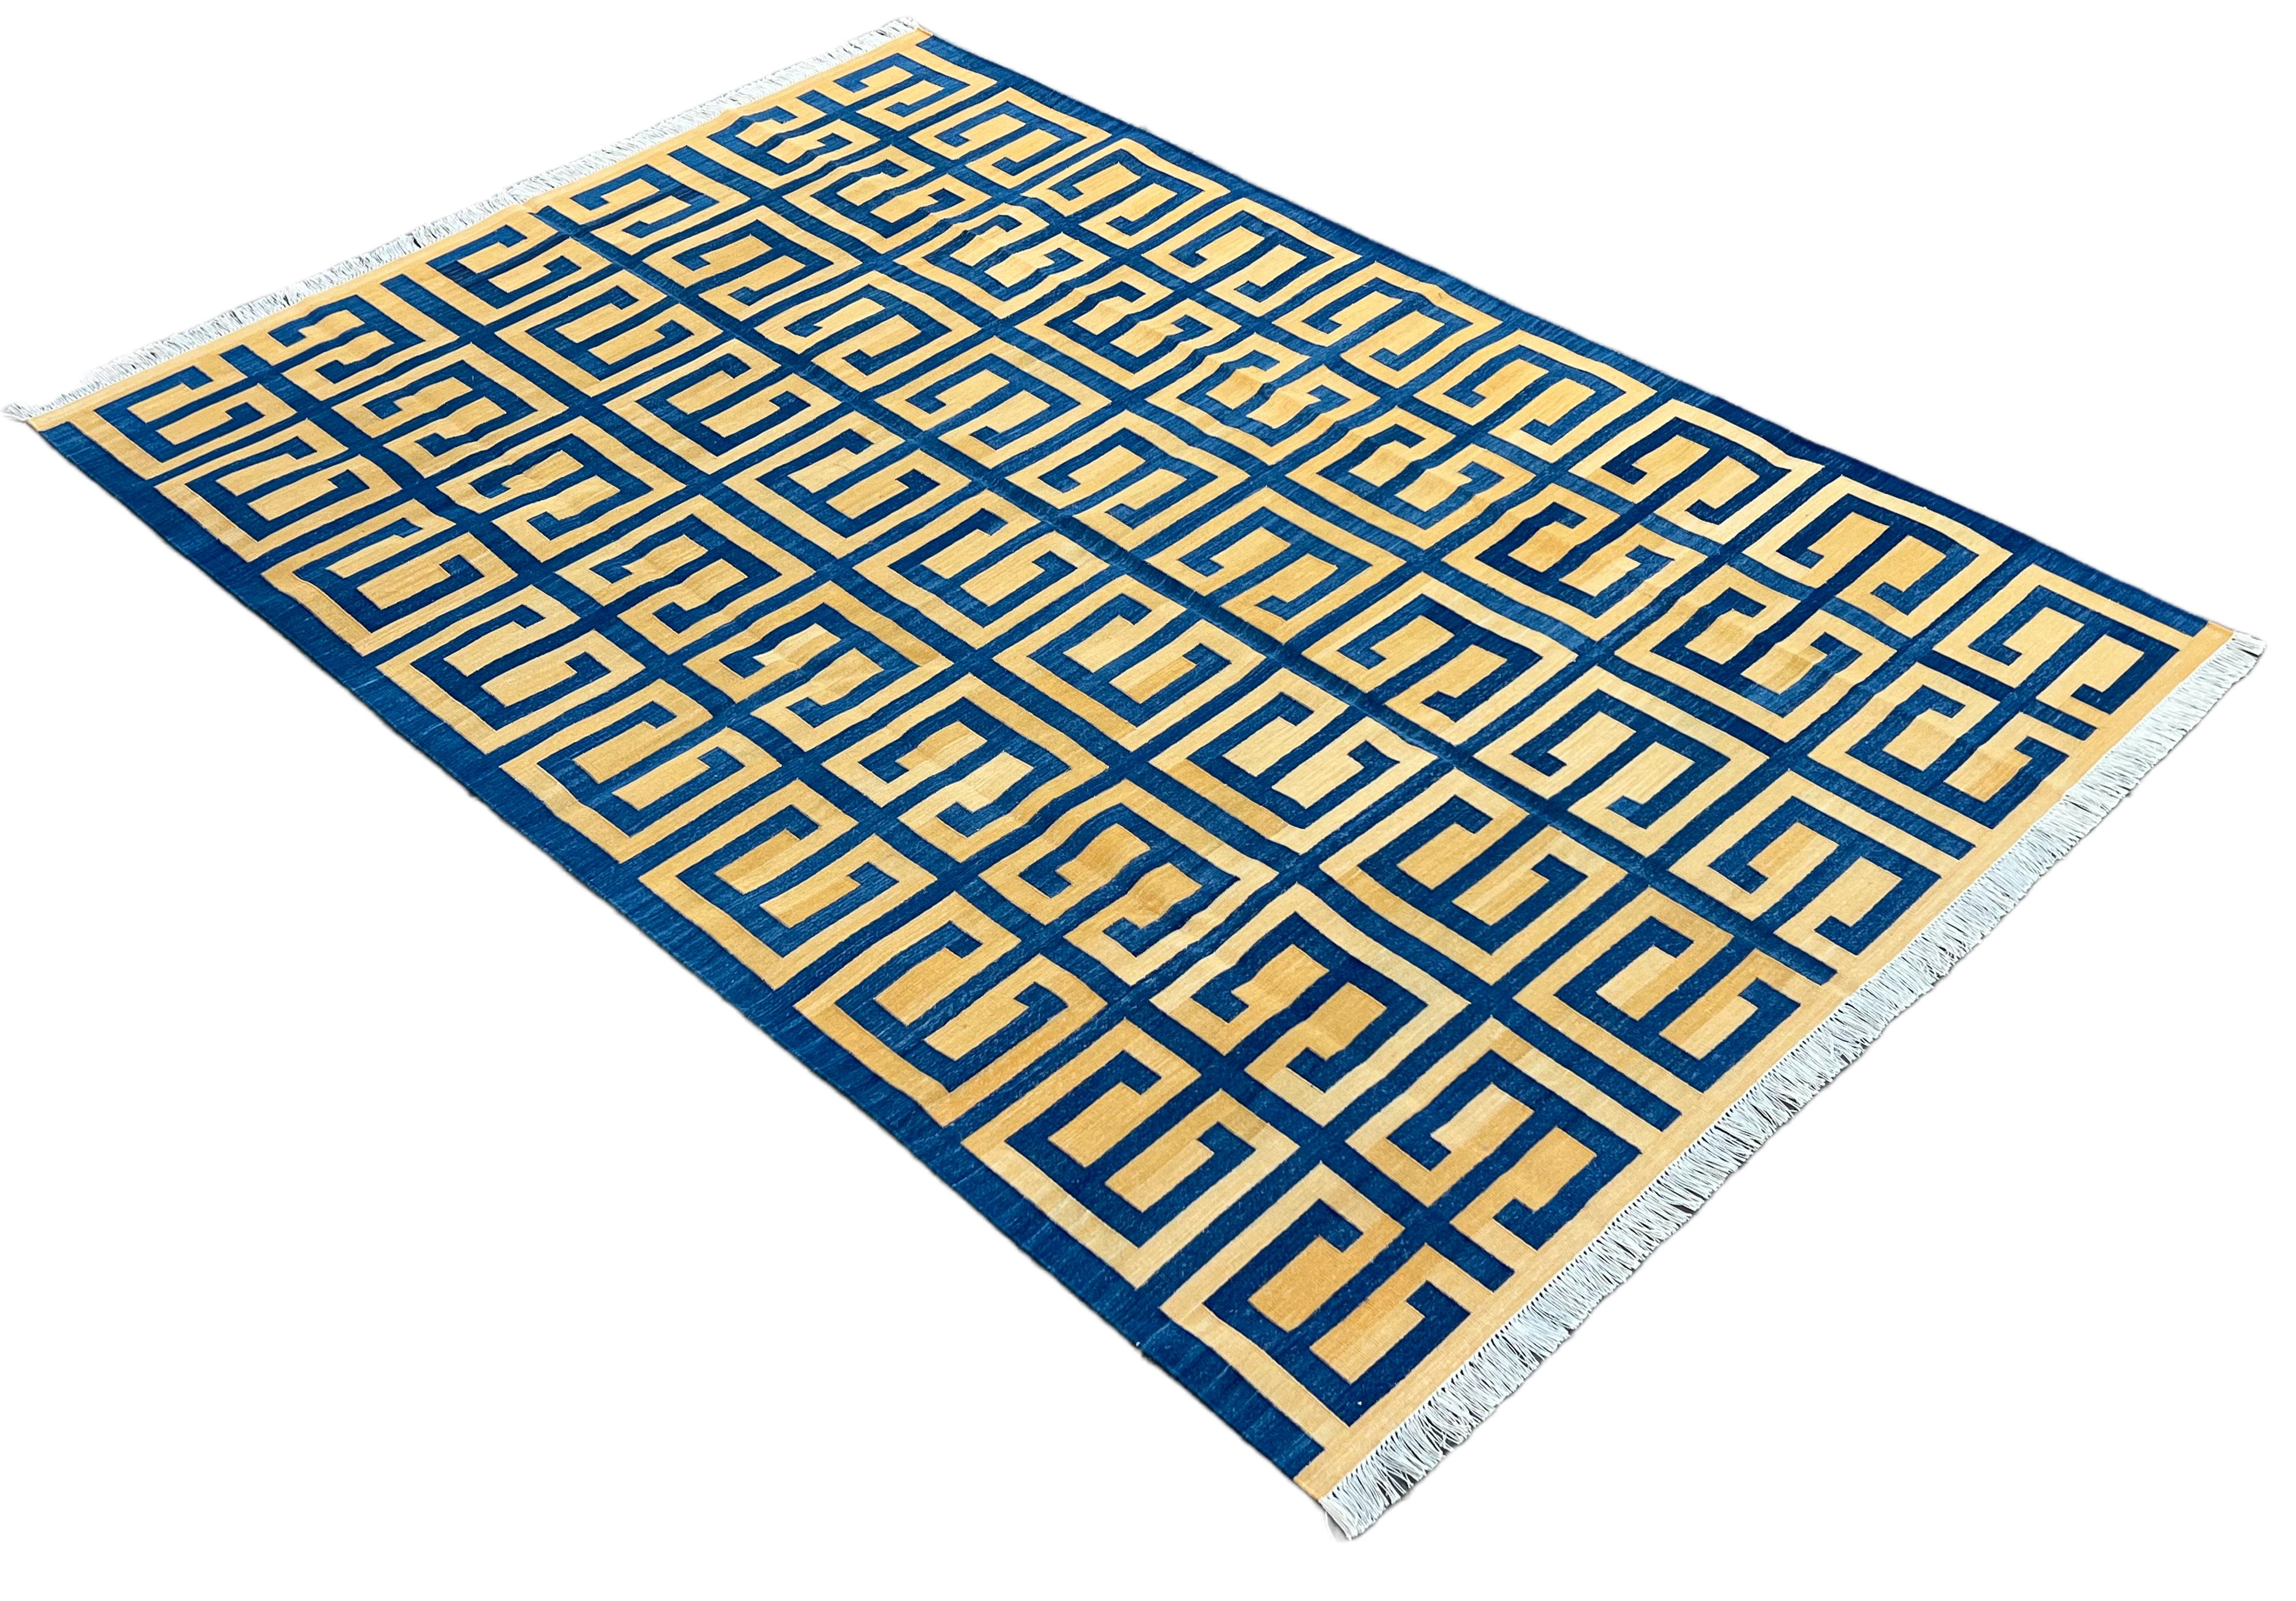 Hand-Woven Handmade Cotton Area Flat Weave Rug, Blue & Yellow Geometric Indian Dhurrie Rug For Sale